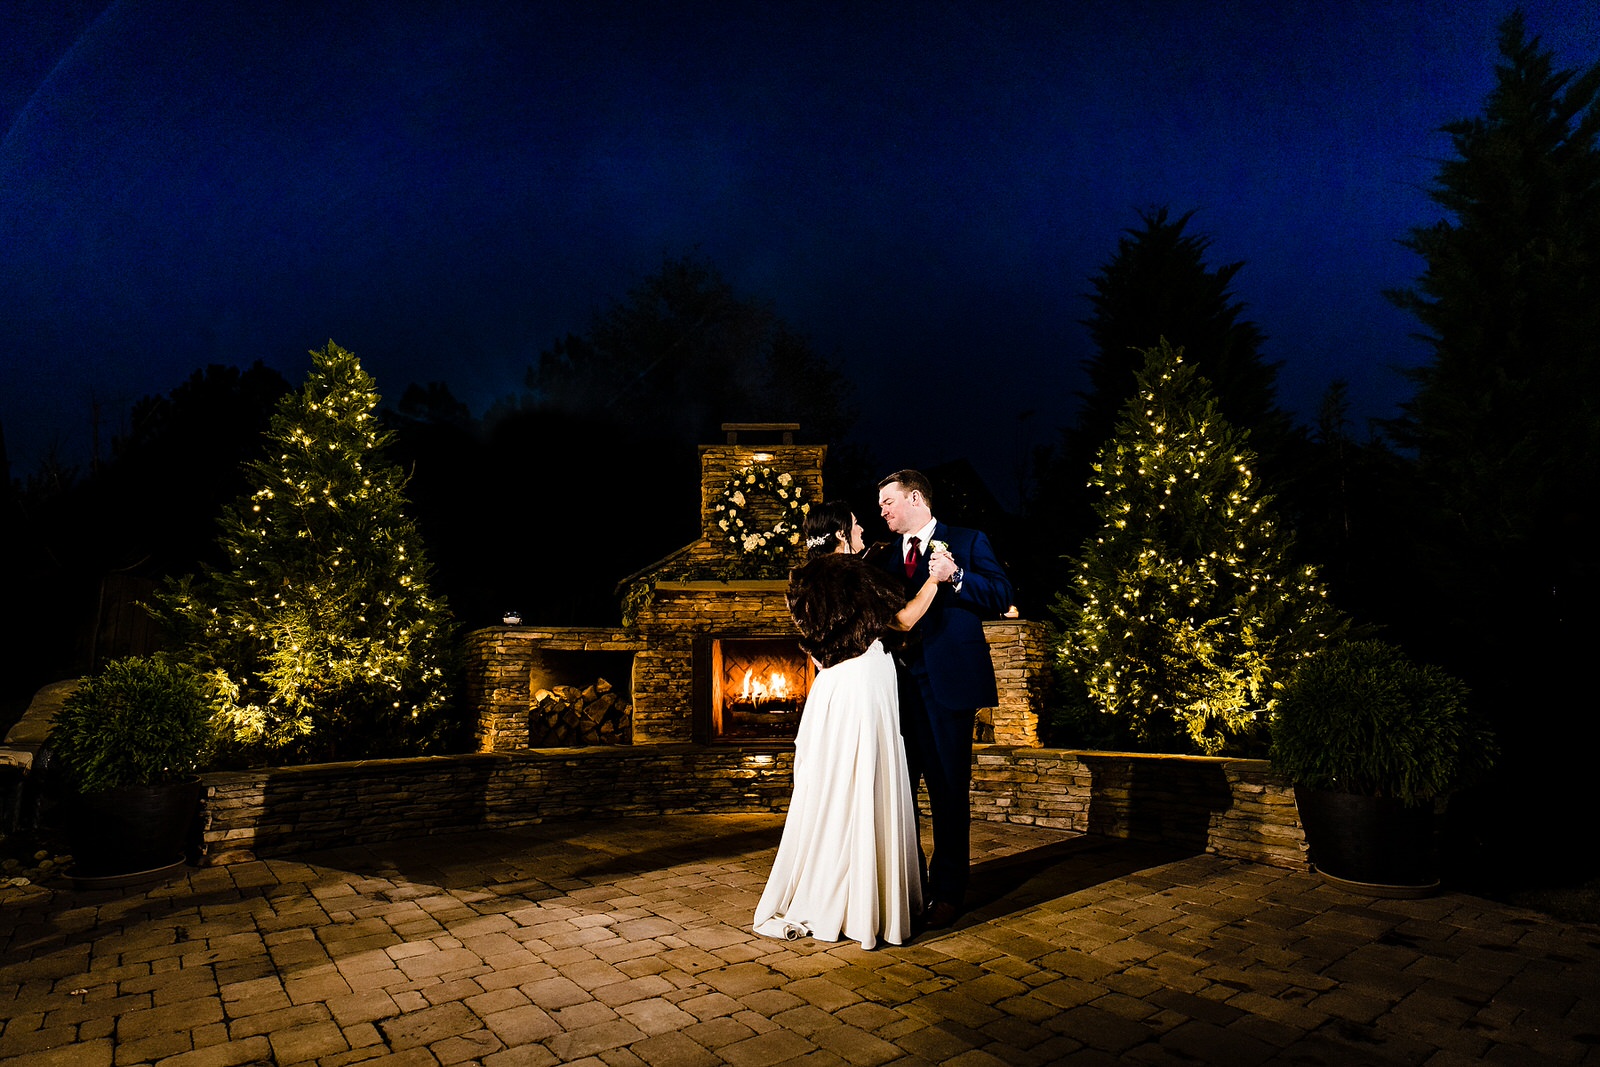 bride and groom have their first dance in front of an outdoor fireplace at a backyard winter wedding